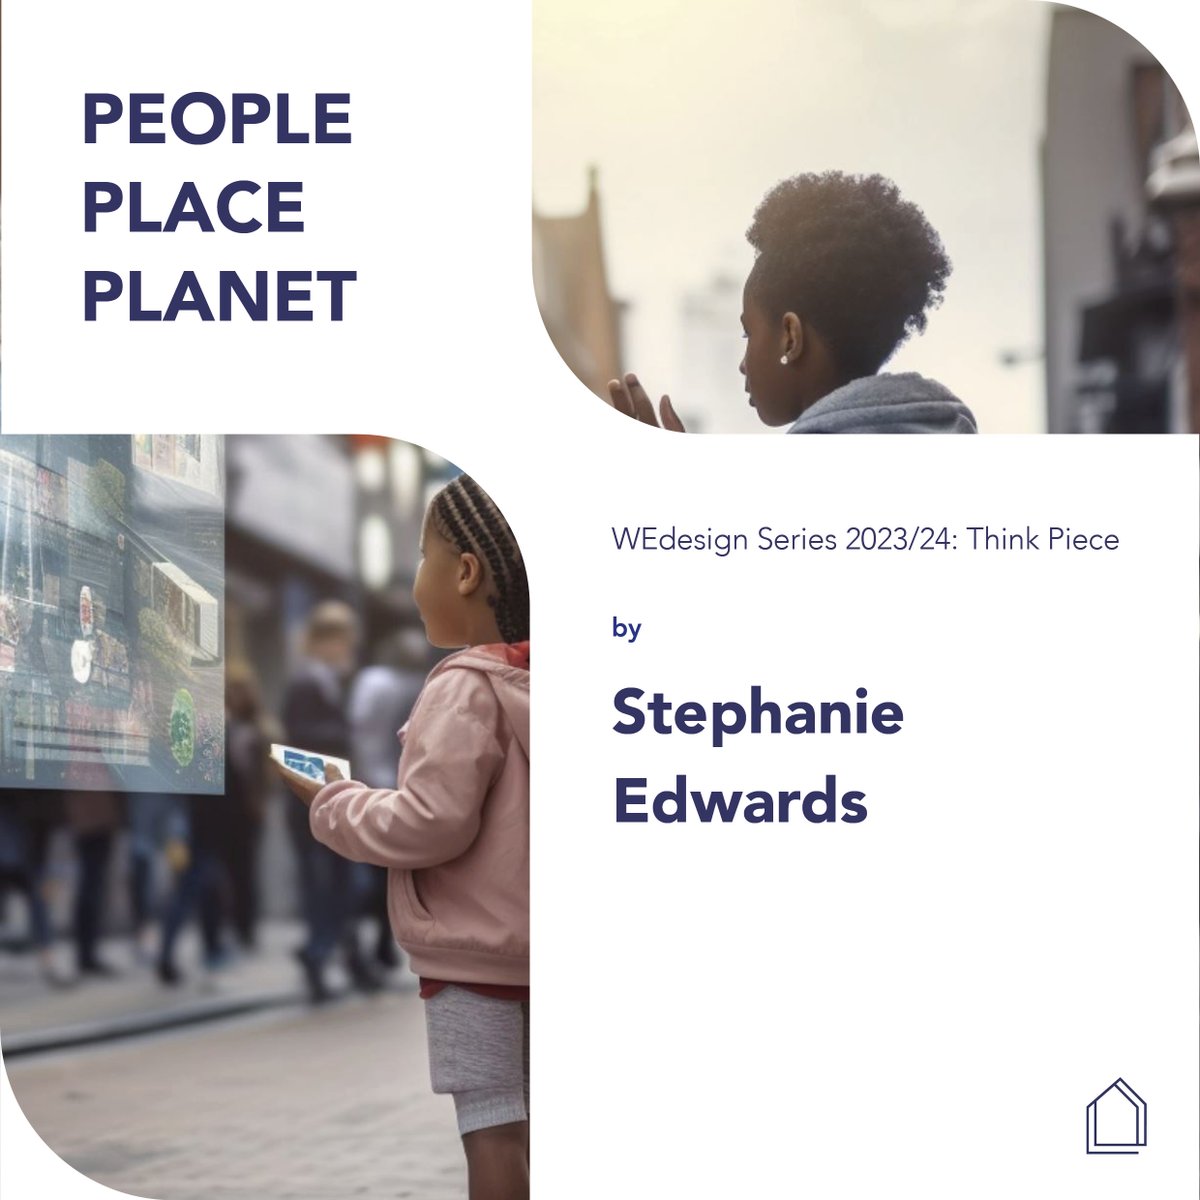 Today on the #GHblog read the third edition of our People, Place, Planet: Think Pieces by Stephanie Edwards who explores the role of AI in co-designing our future cities.

@urbansymbiotics @stephurbansym 
#WEdesign
#peopleplaceplanet

theglasshouse.org.uk/blog-series/pe…